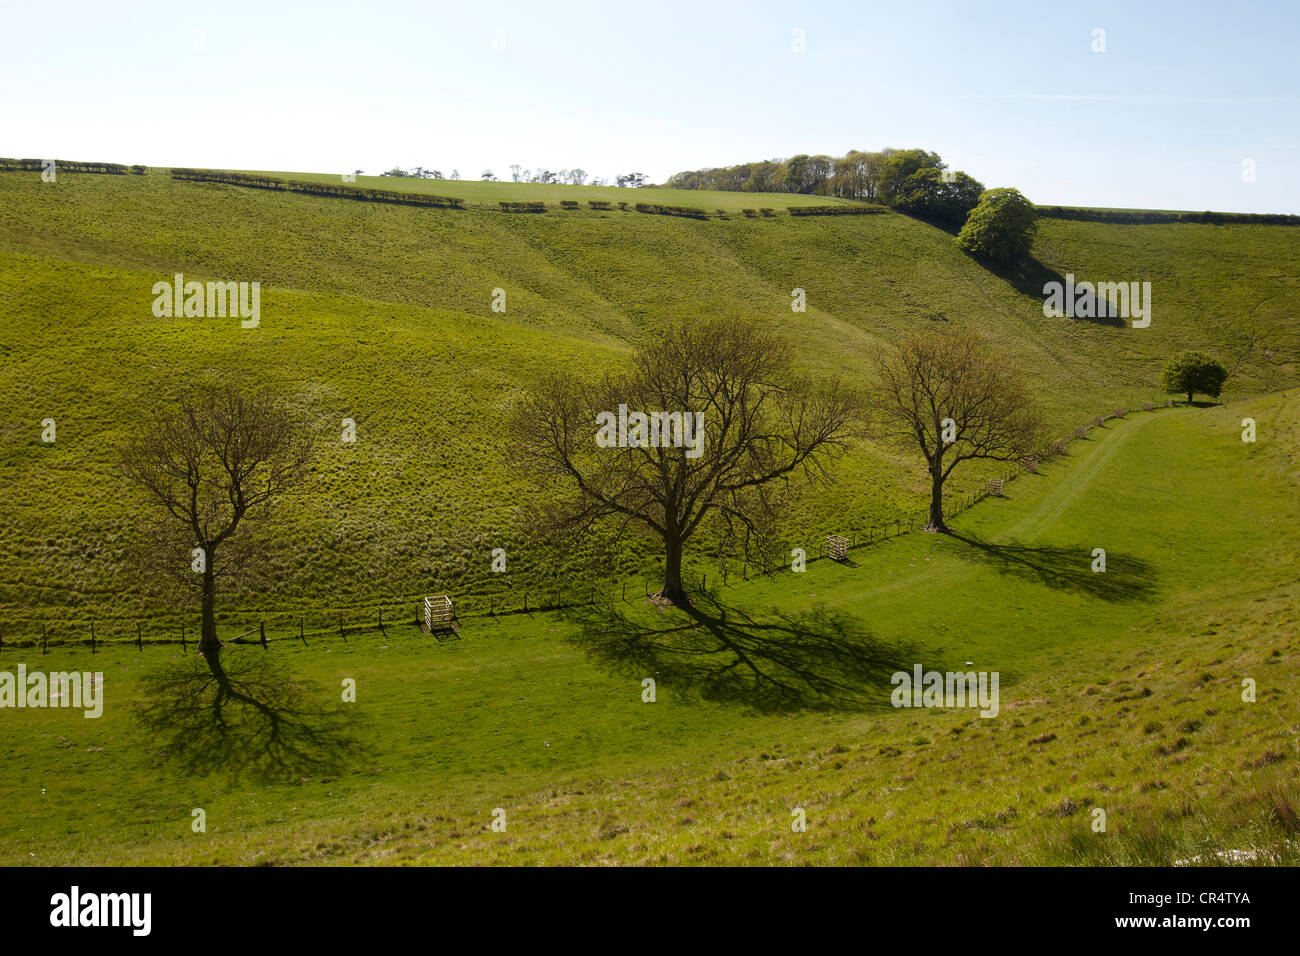 Thixen dale, The Wolds, East Yorkshire, UK Stock Photo